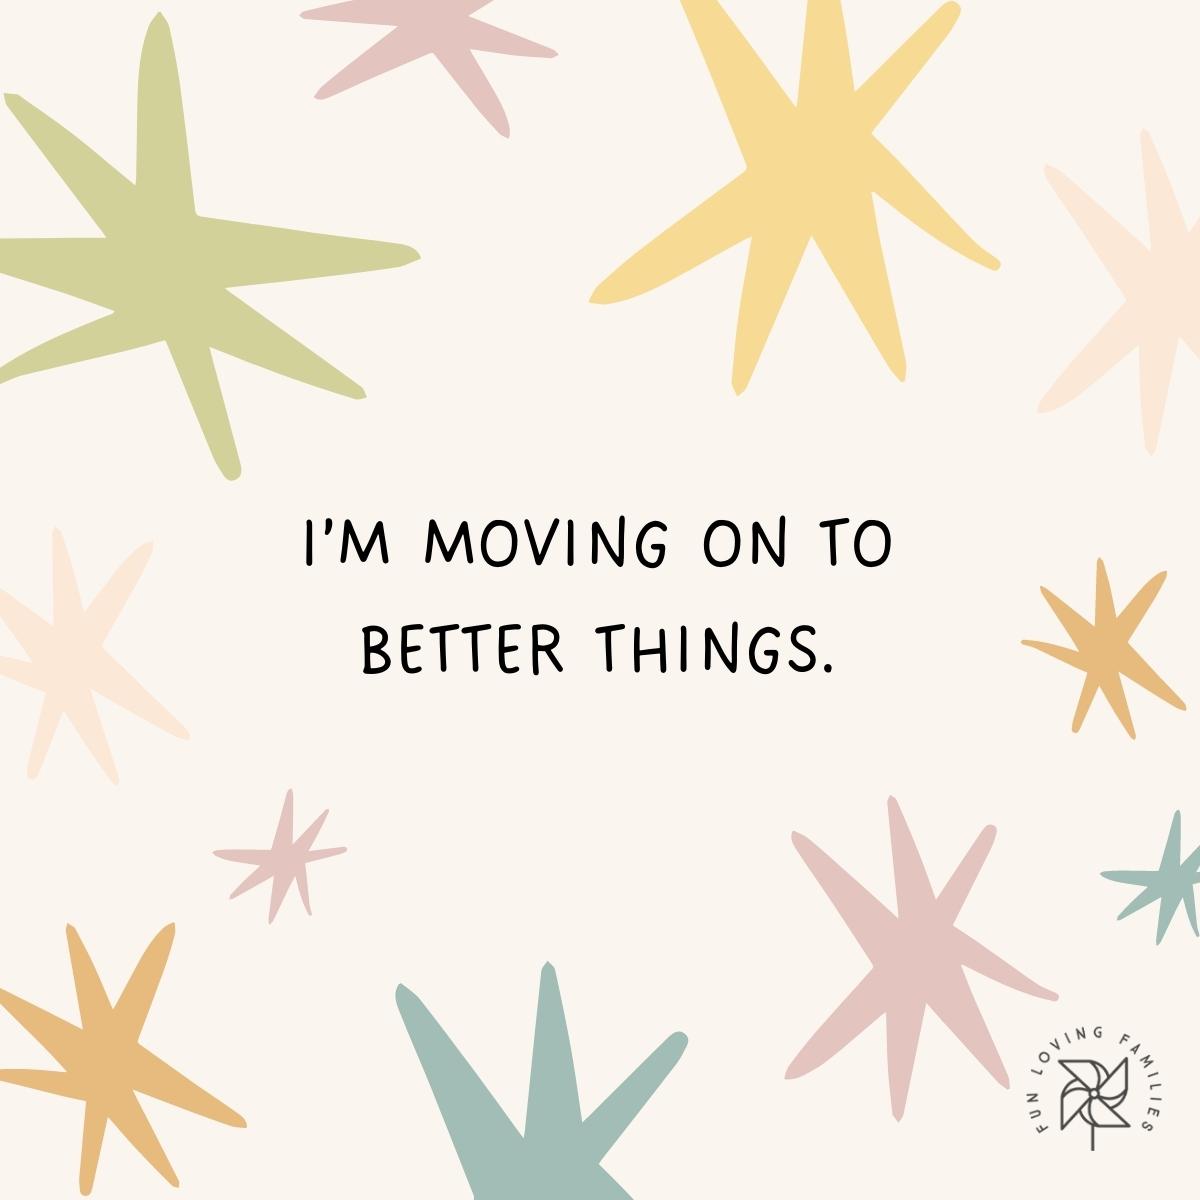 I’m moving on to better things affirmation